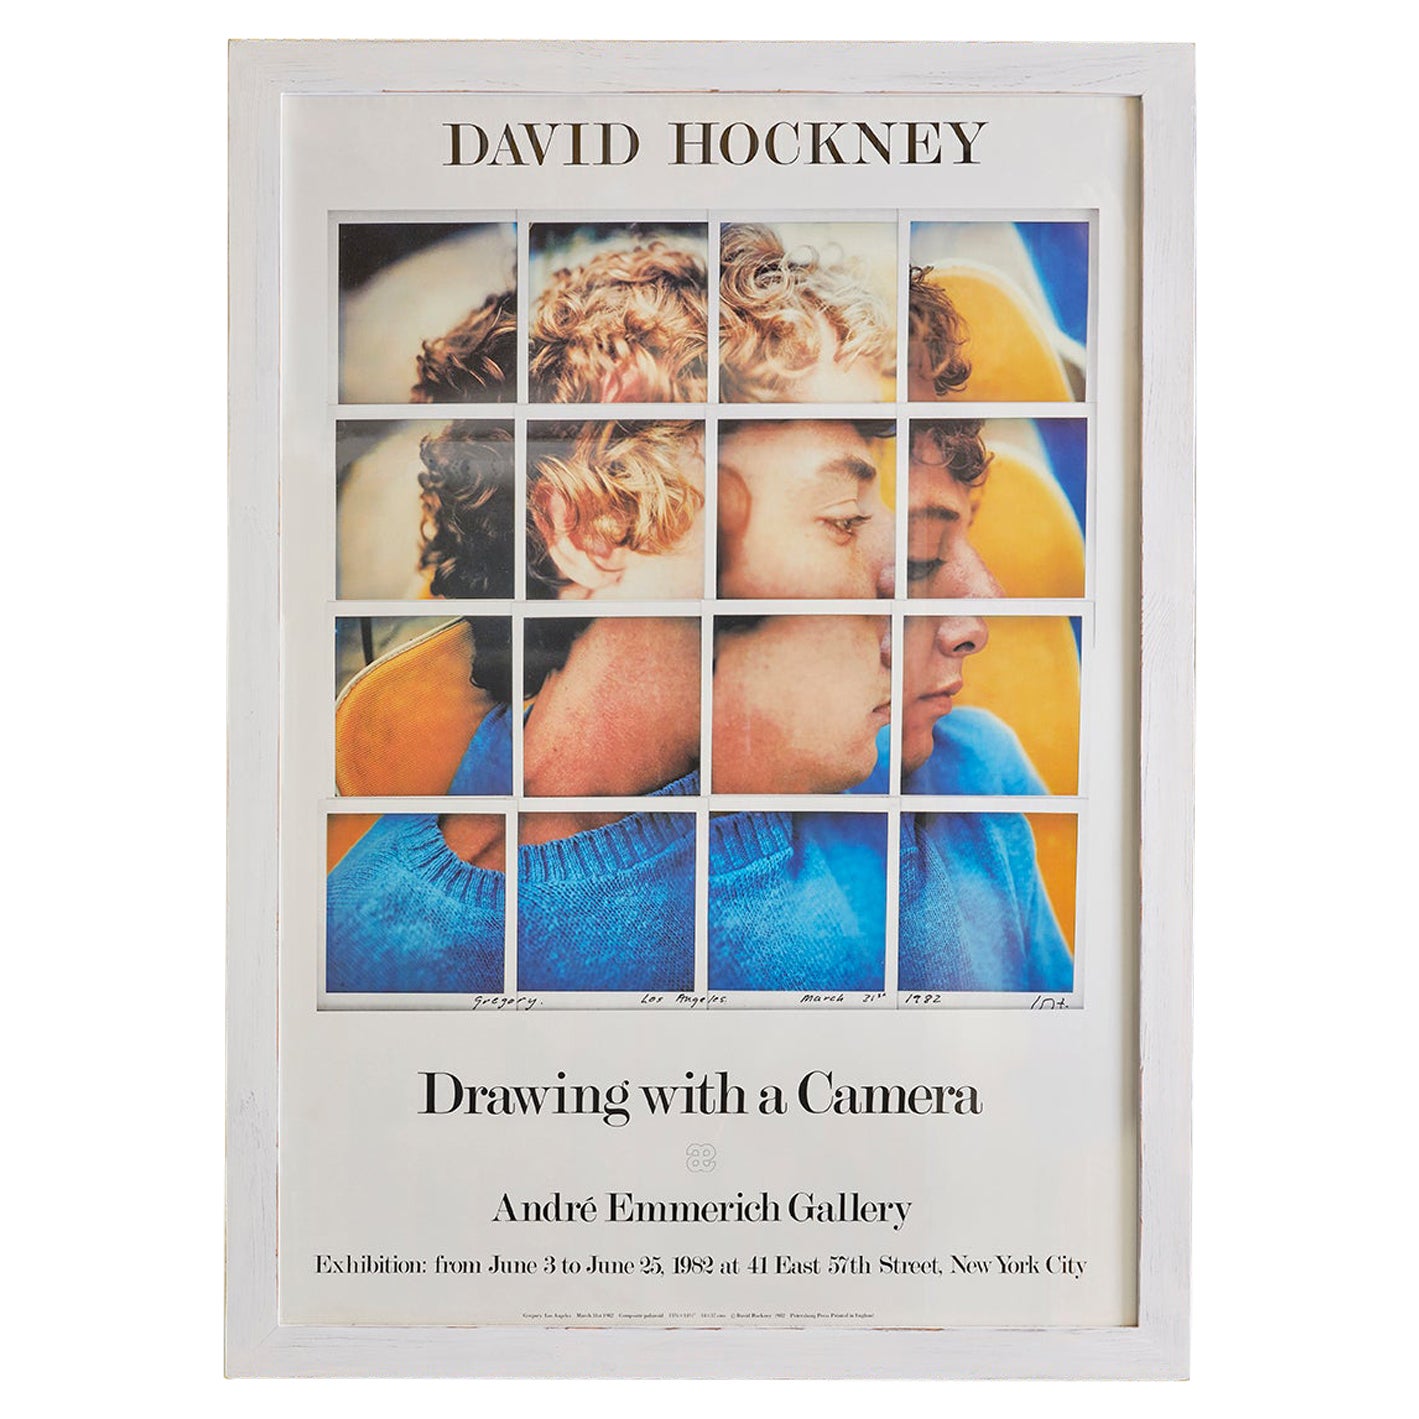 Vintage Poster David Hockney "Drawing with a Camera" Andre Emmerich, USA, 1982